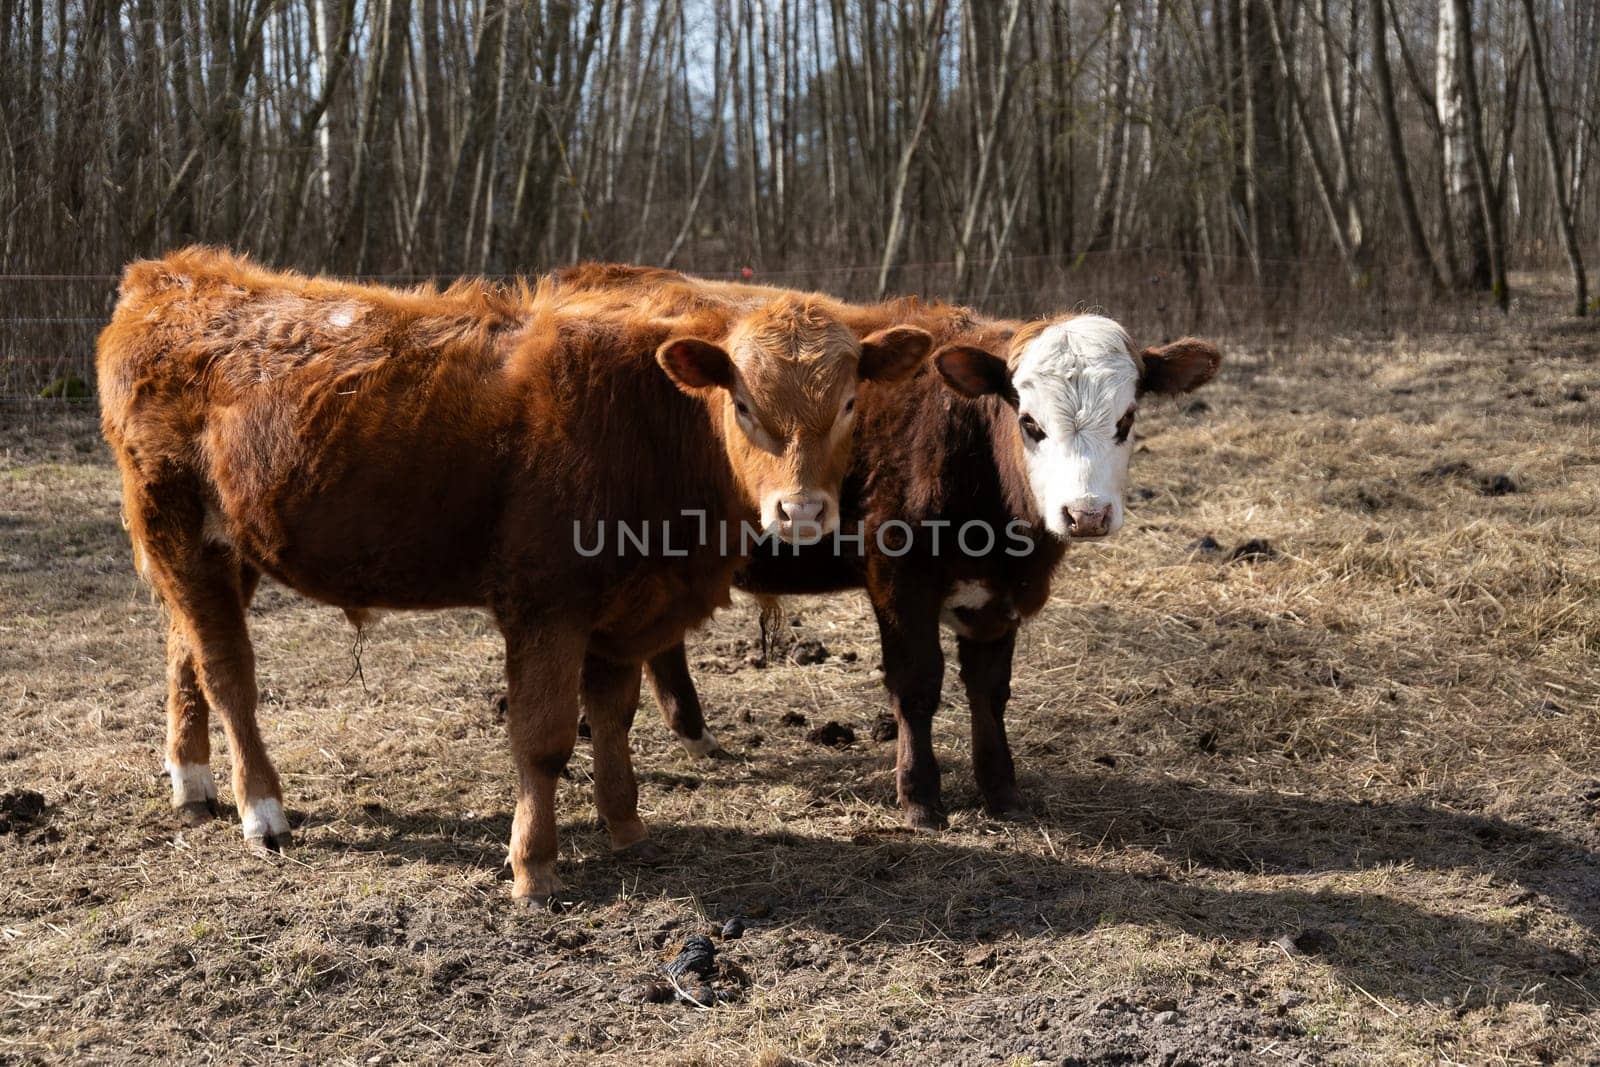 In the image, two cows are standing on top of a dry grass field. The cows are calmly eating and roaming around the parched landscape, surrounded by patches of brown grass.